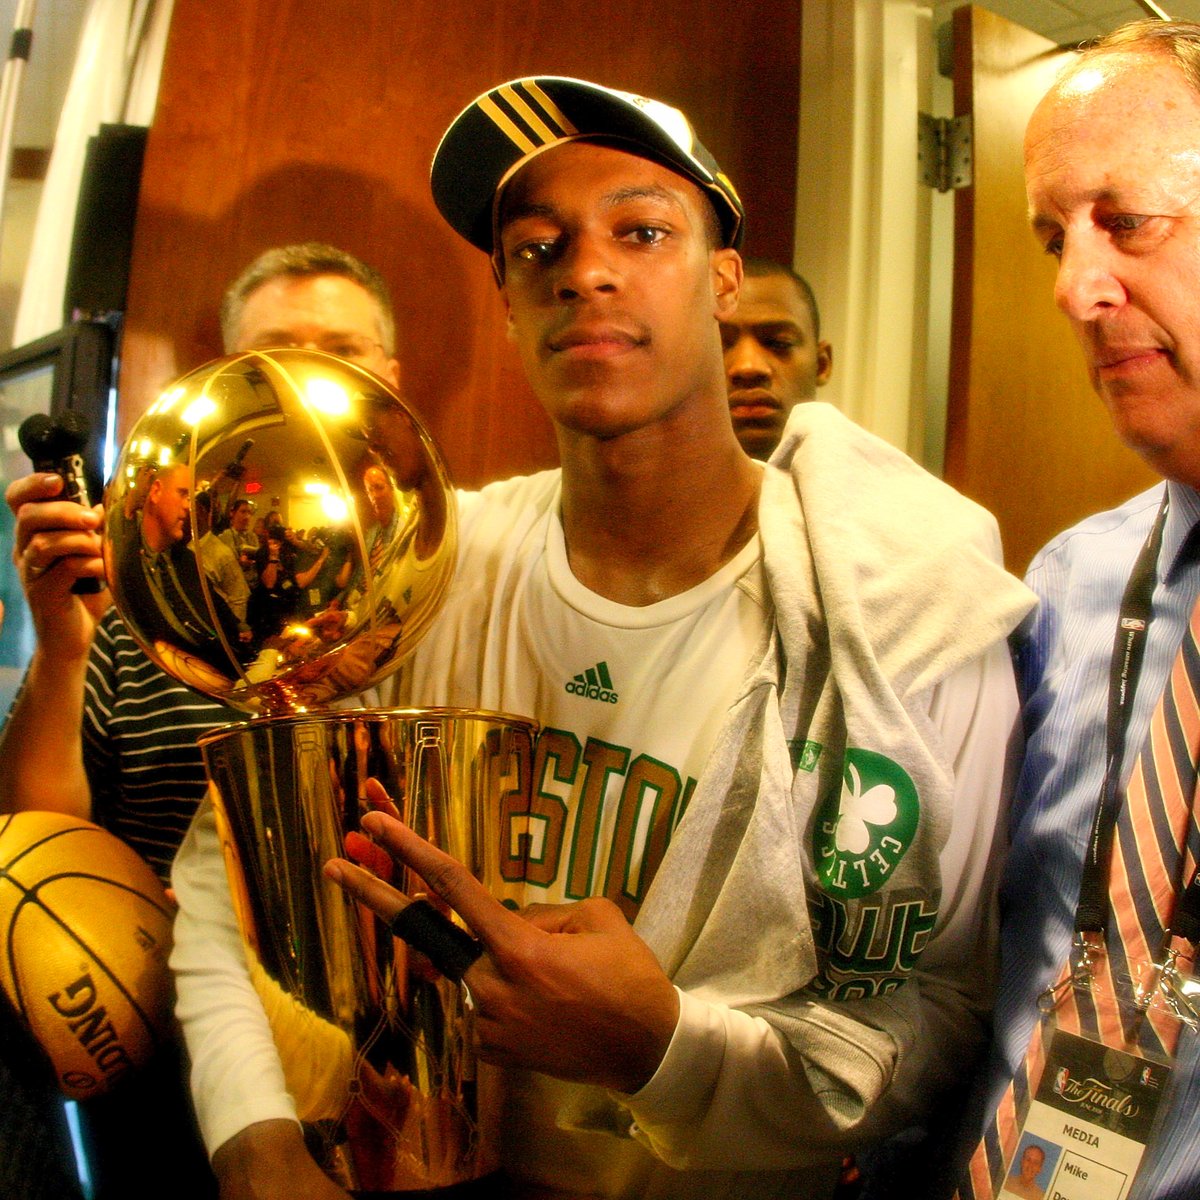 Rajon RONDOOOOOOOOOO 🗣️ Congrats on an incredible career, enjoy your retirement and thank you for all the special times you shared with us as a Celtic 🏆☘️